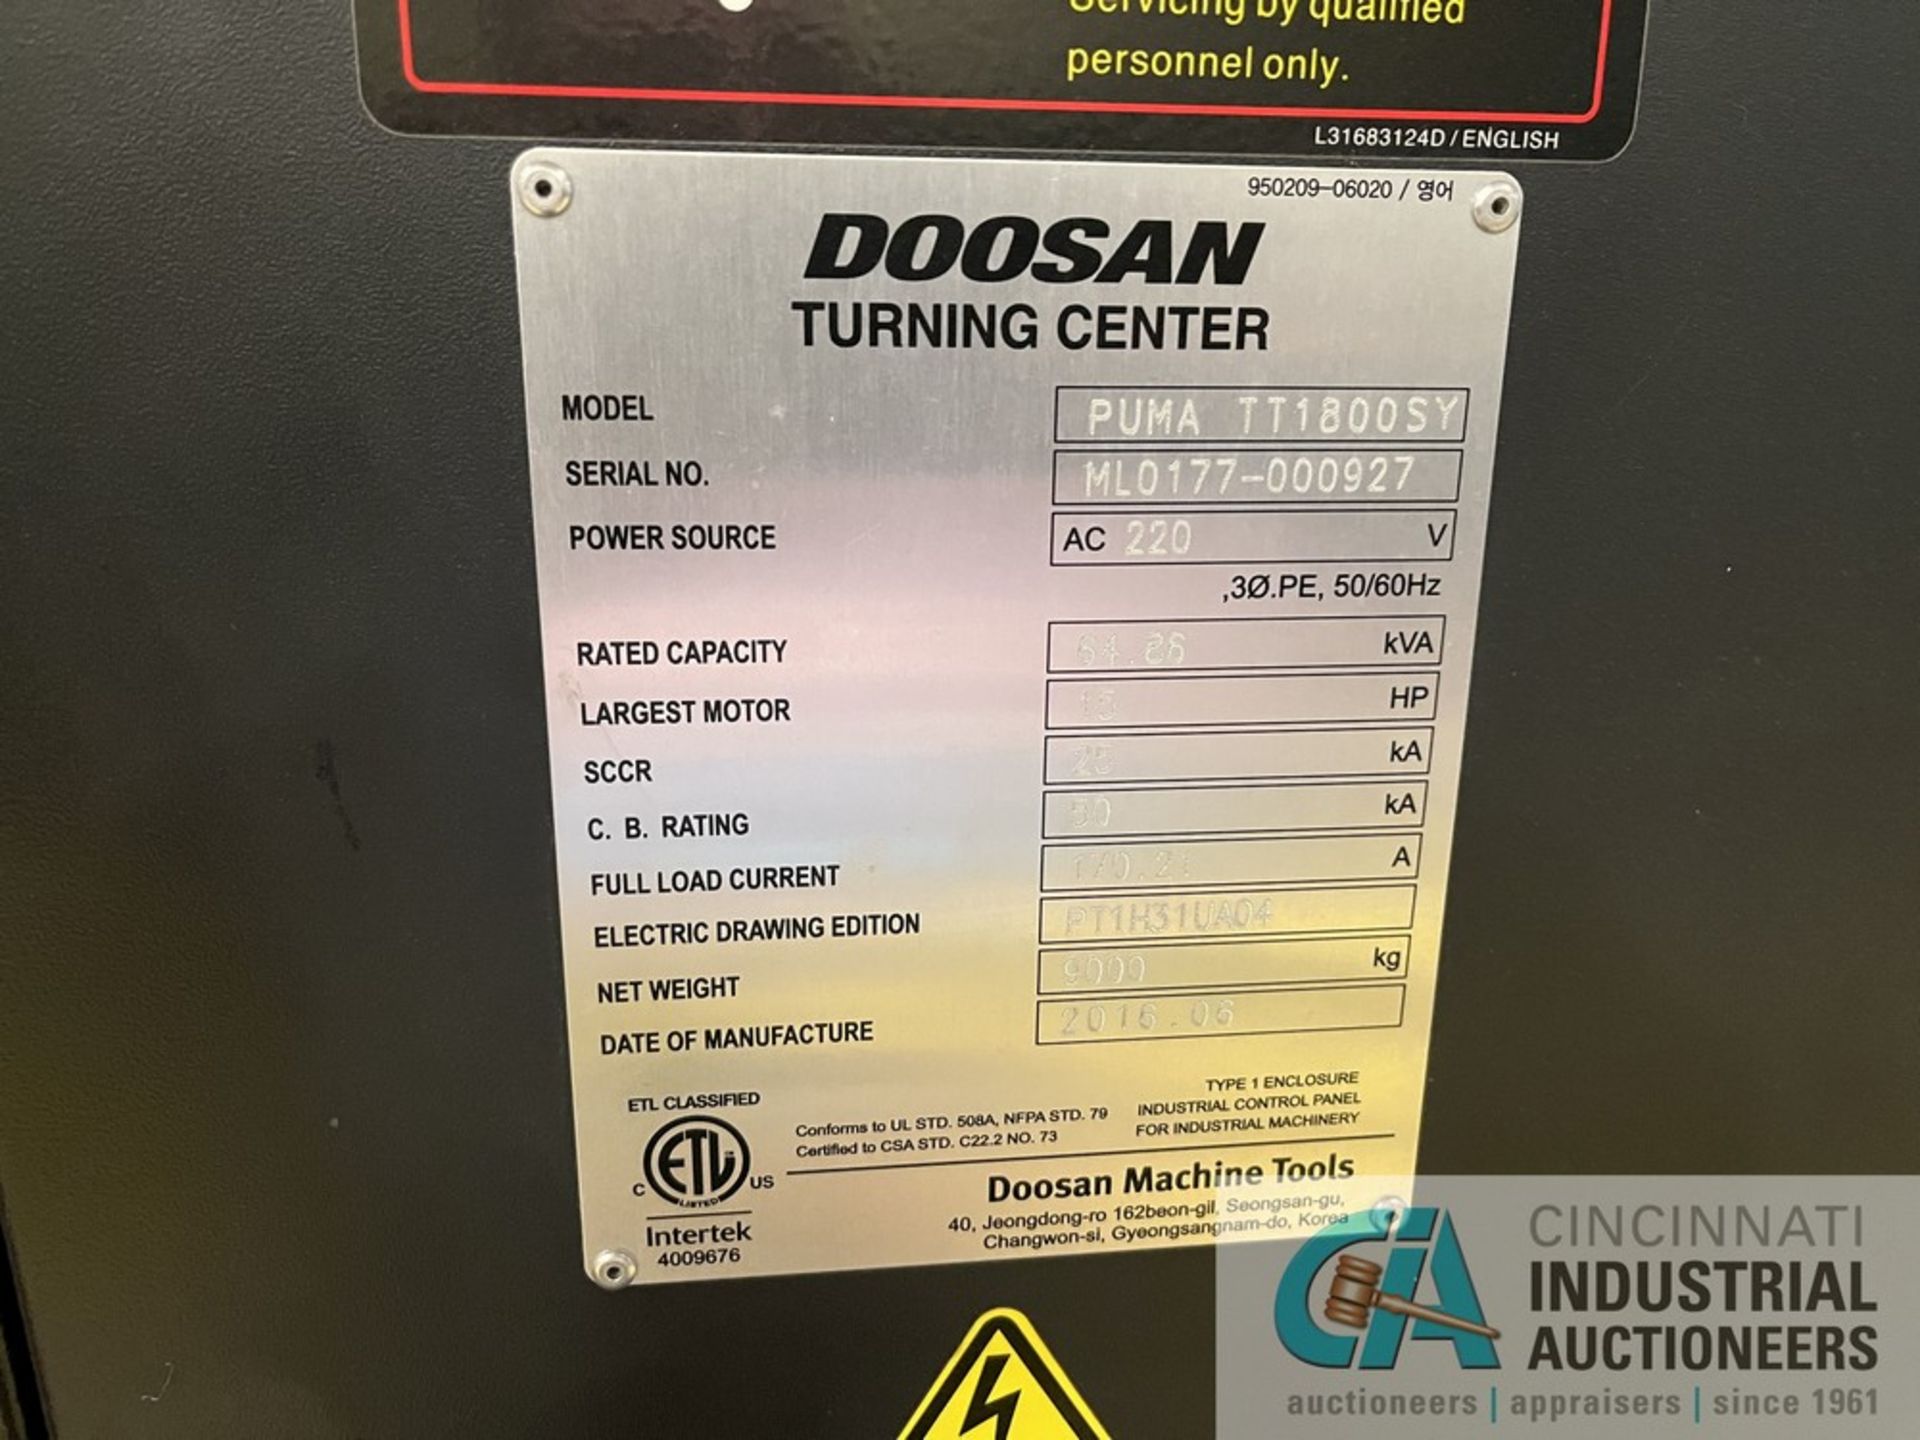 DOOSAN MODEL TT1800SY DUAL SPINDLE LIVE TOOL CNC LATHE; S/N ML0177-000927 (NEW 6/2016), DISTANCE - Image 18 of 19